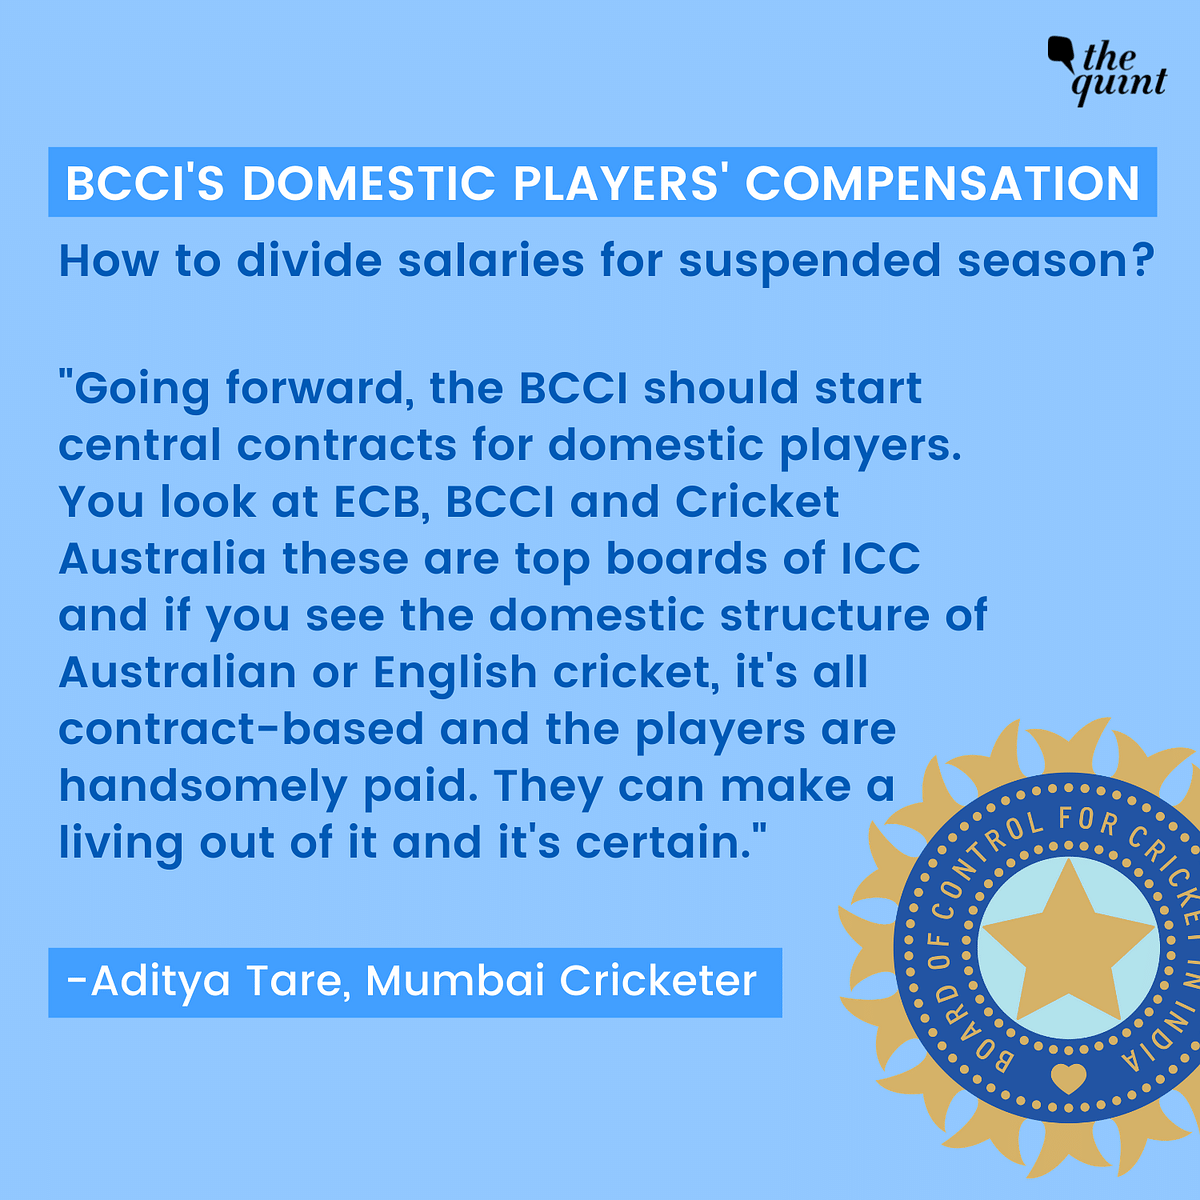 BCCI has decided to compensate players for the cancelled Ranji season in 2020-21, but how will the money be divided?